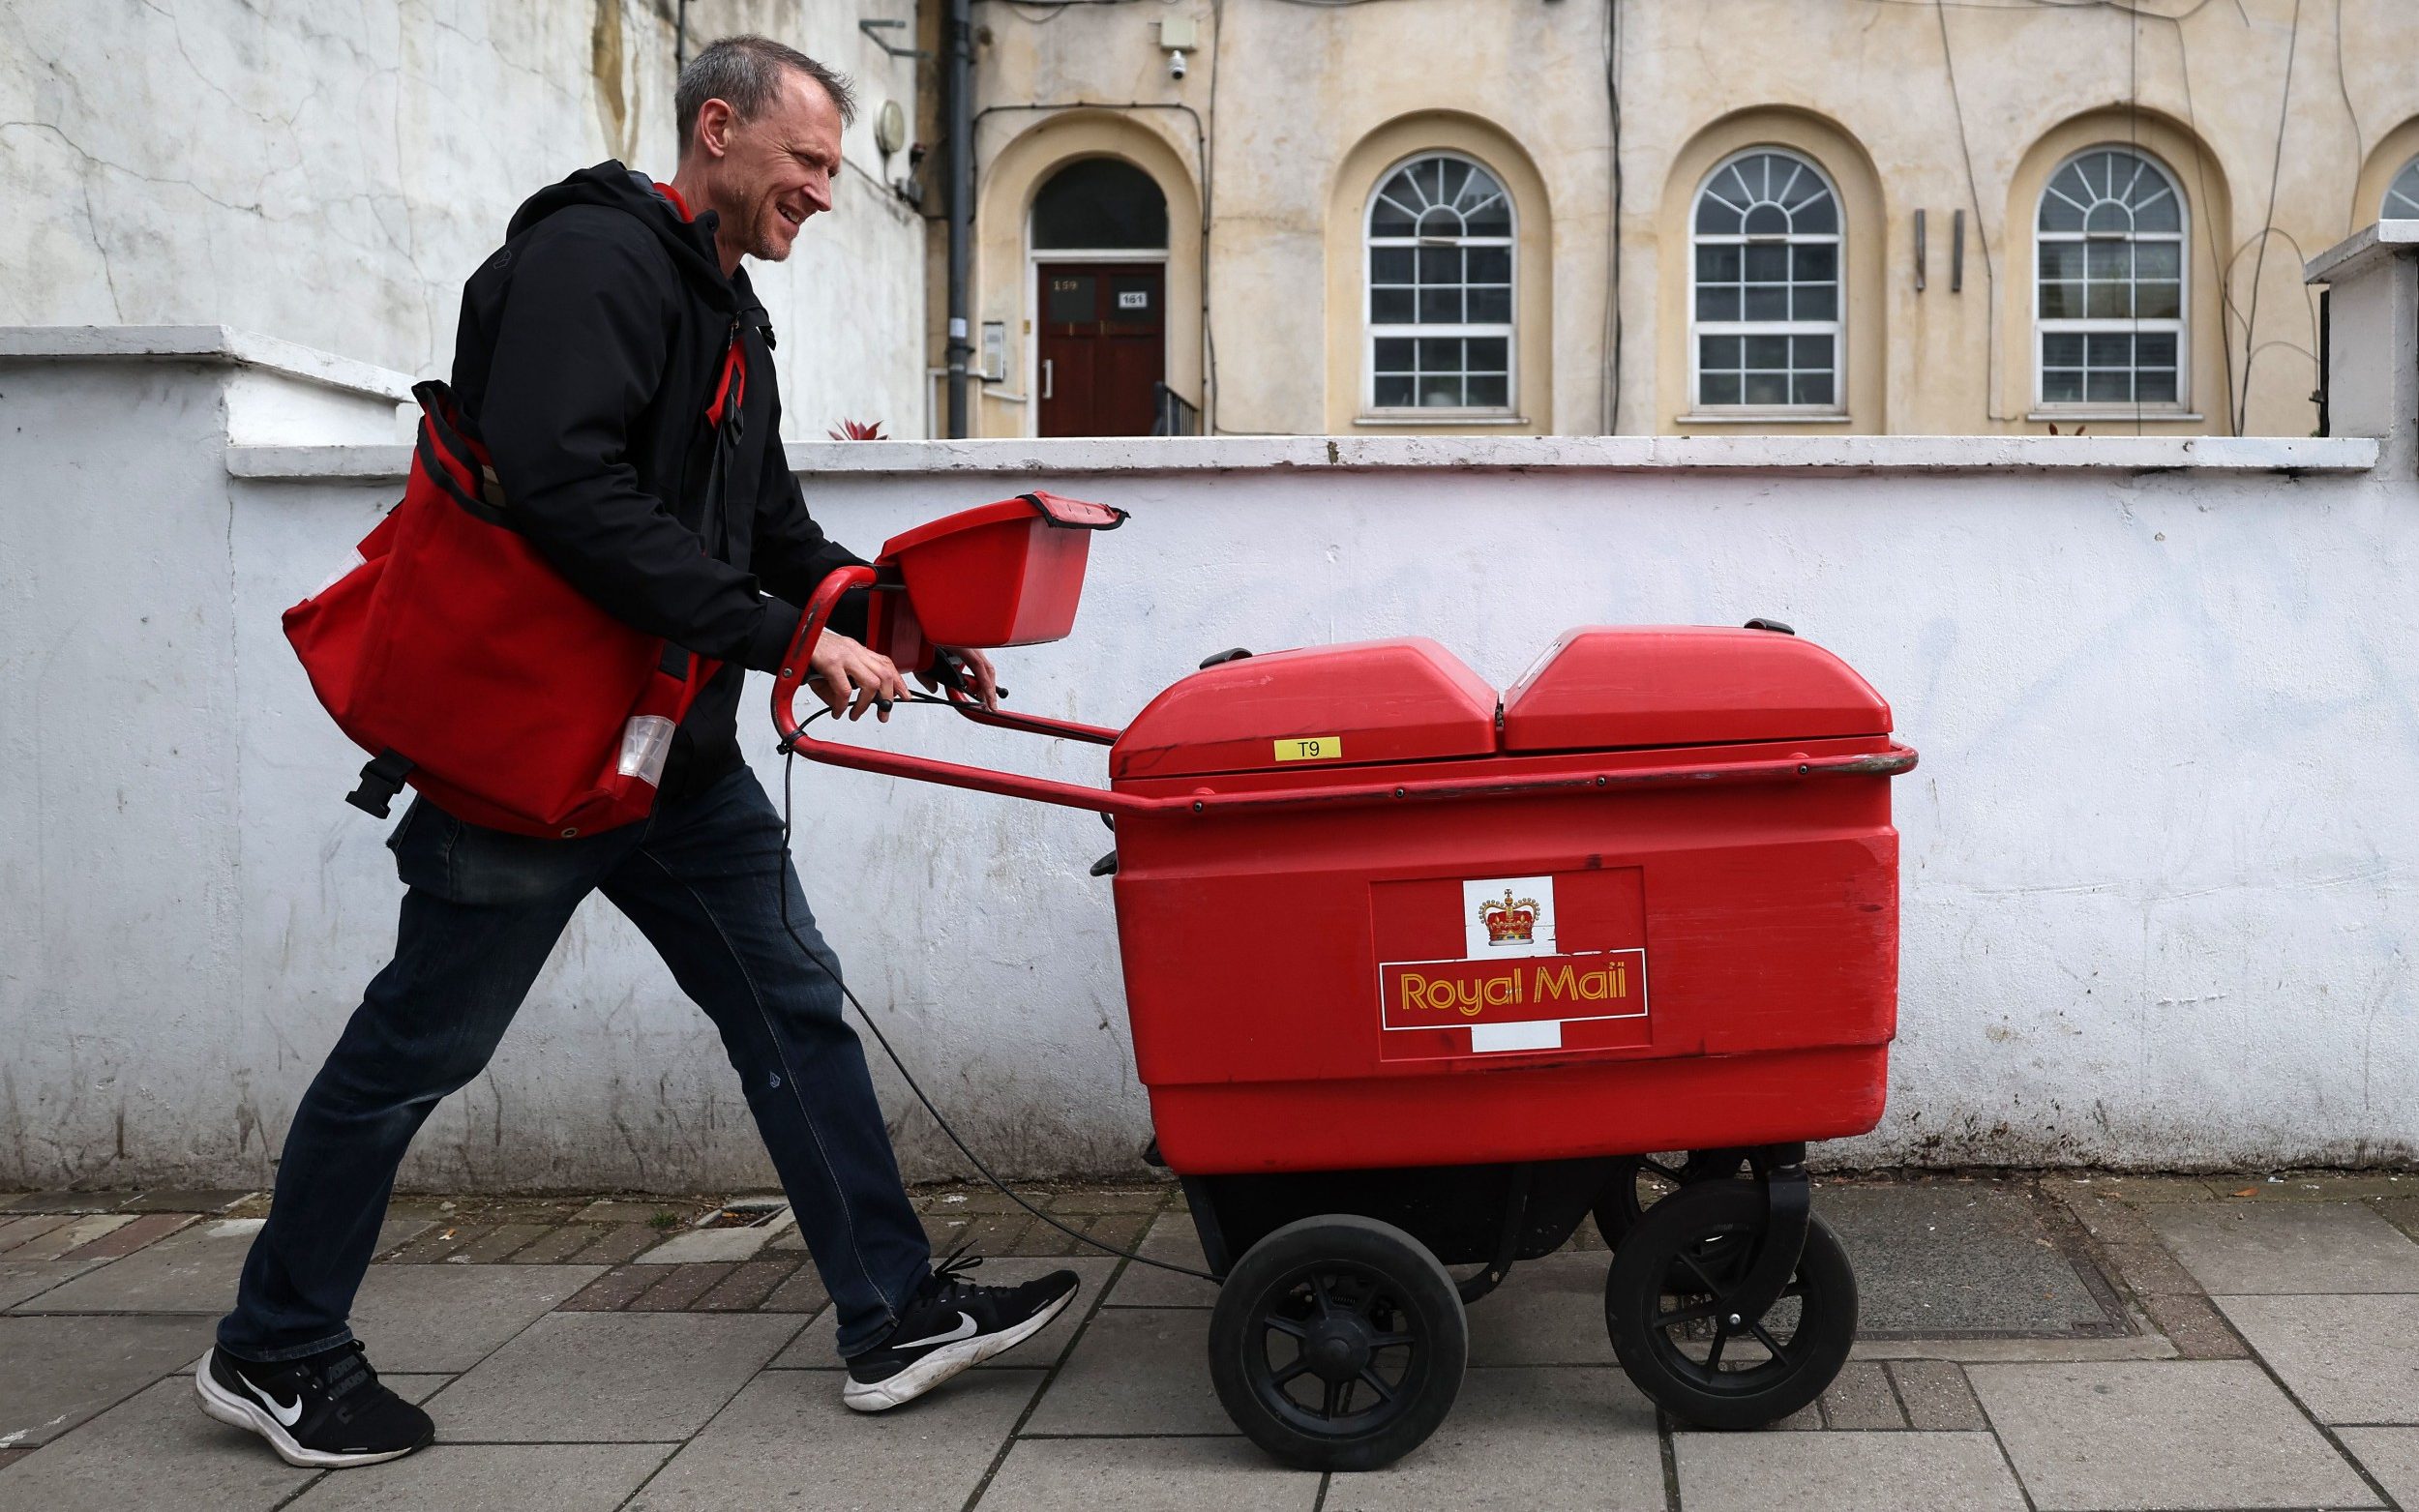 royal mail seeks to fast-track delivery shake-up after shock takeover bid